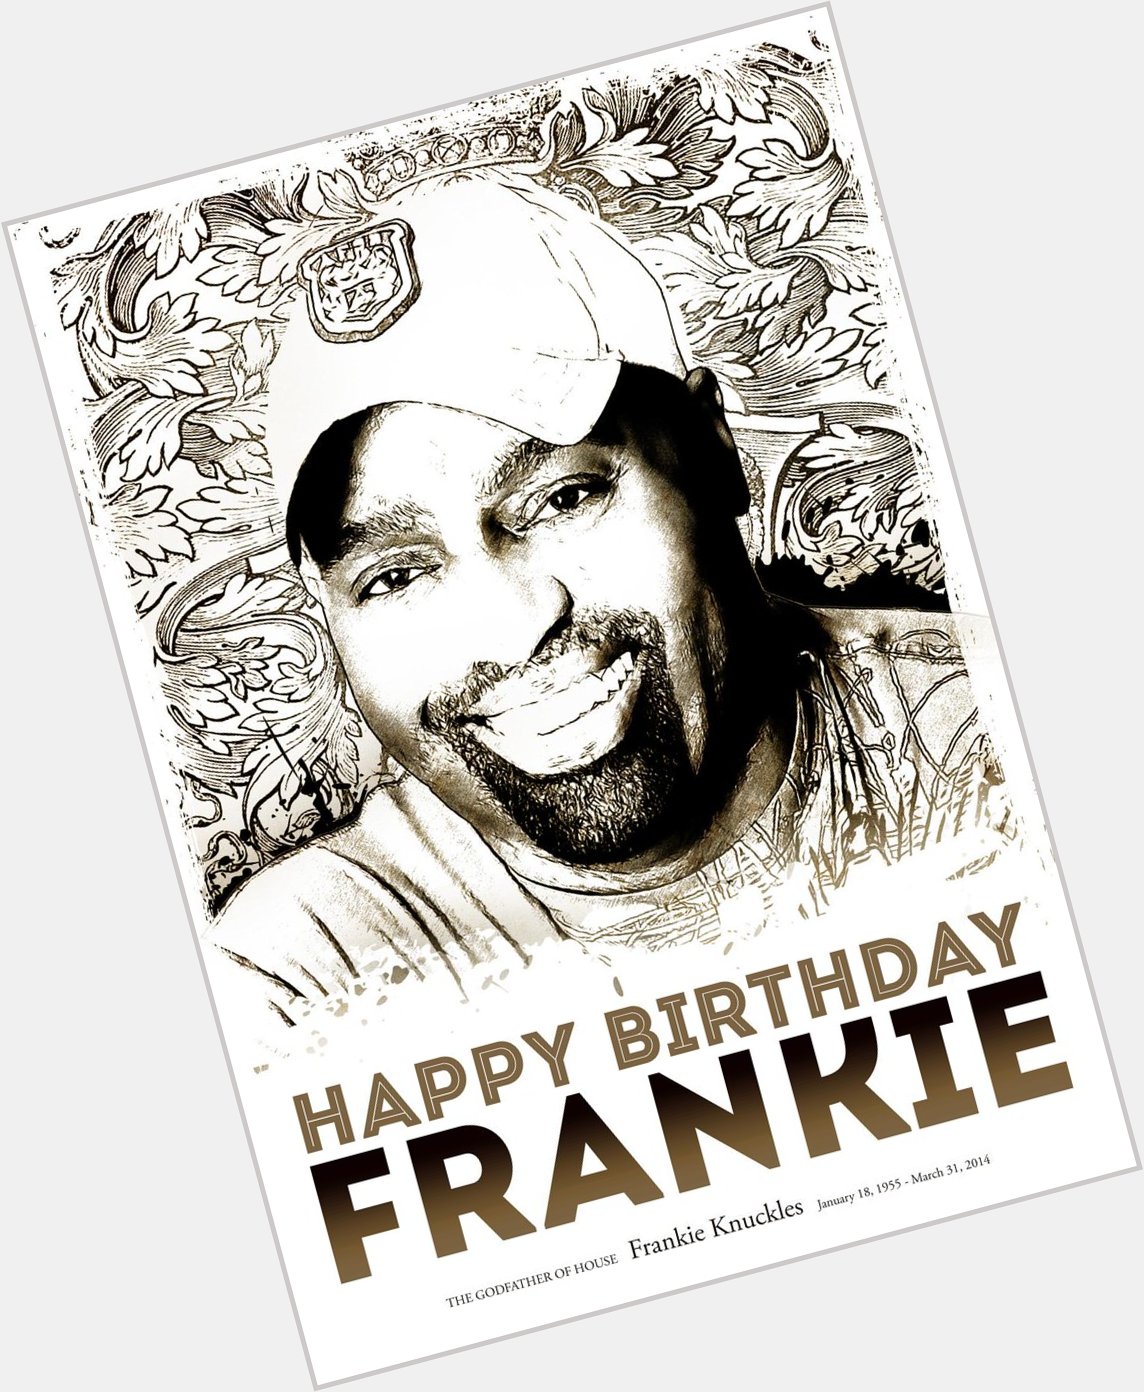 Happy Bday to the late Frankie Knuckles Thank you for yo contribution 2 the House nation   